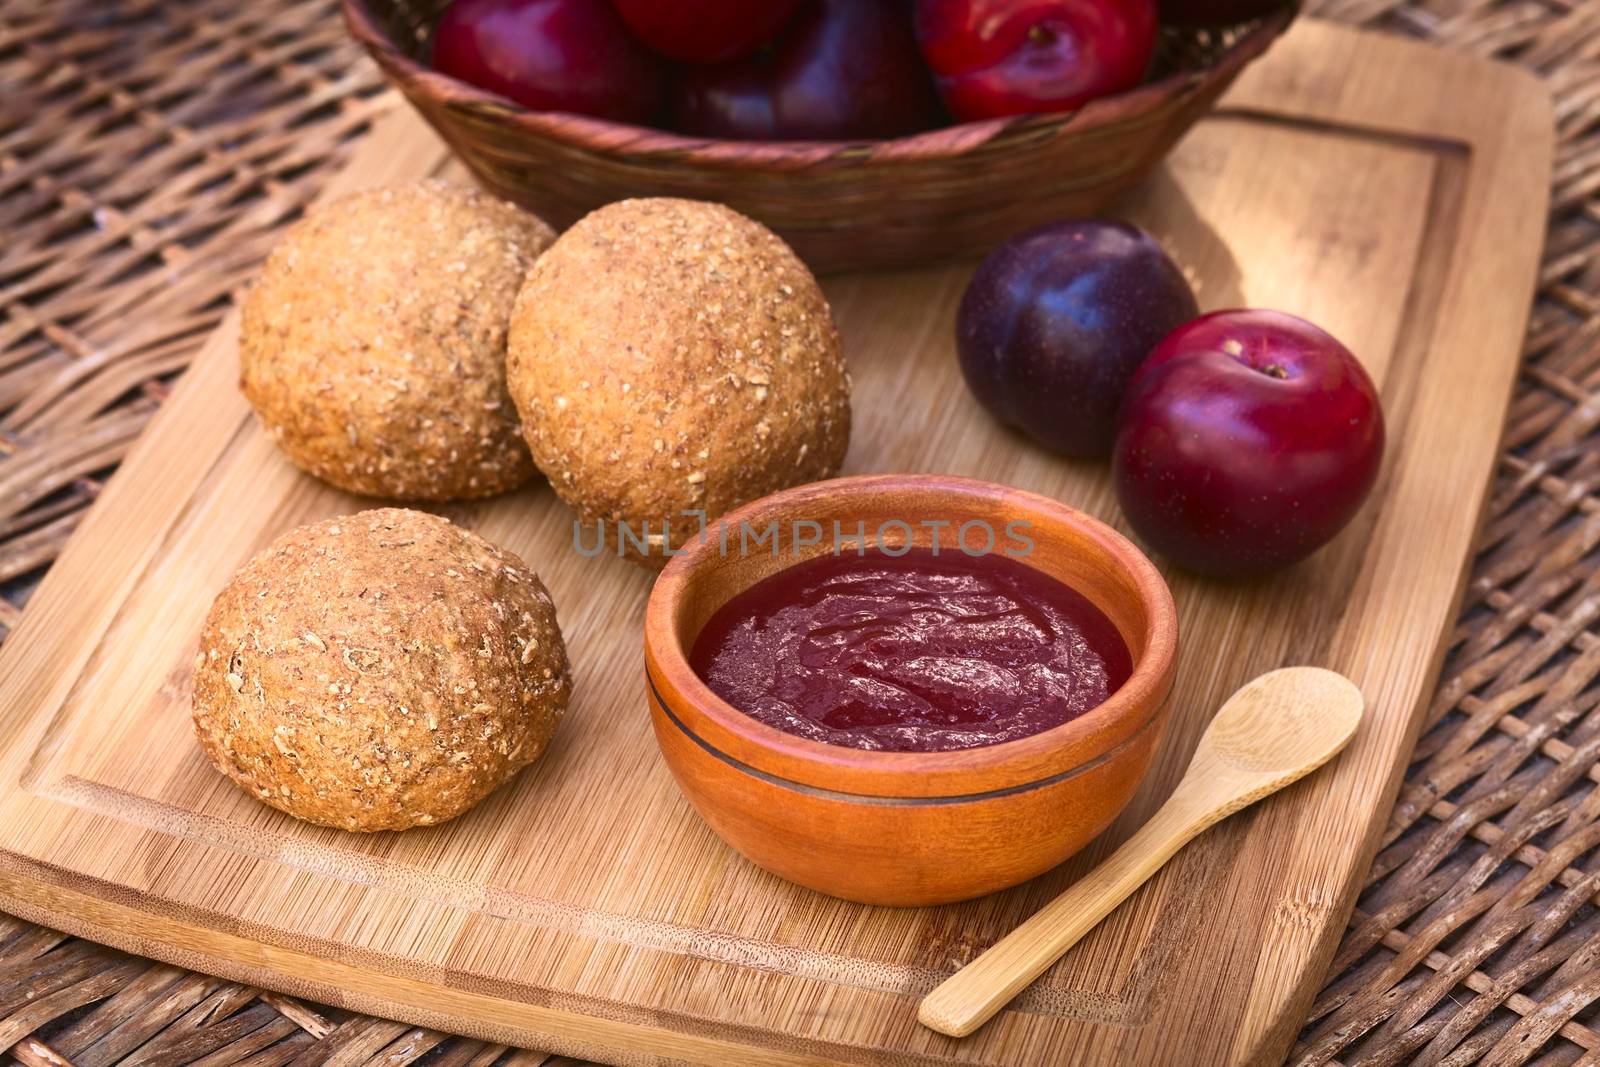 Small wooden bowl of plum jam with wholegrain buns and satsuma plums on wooden board photographed with natural light (Selective Focus, Focus in the middle of the jam and on the front of the bun next to it)